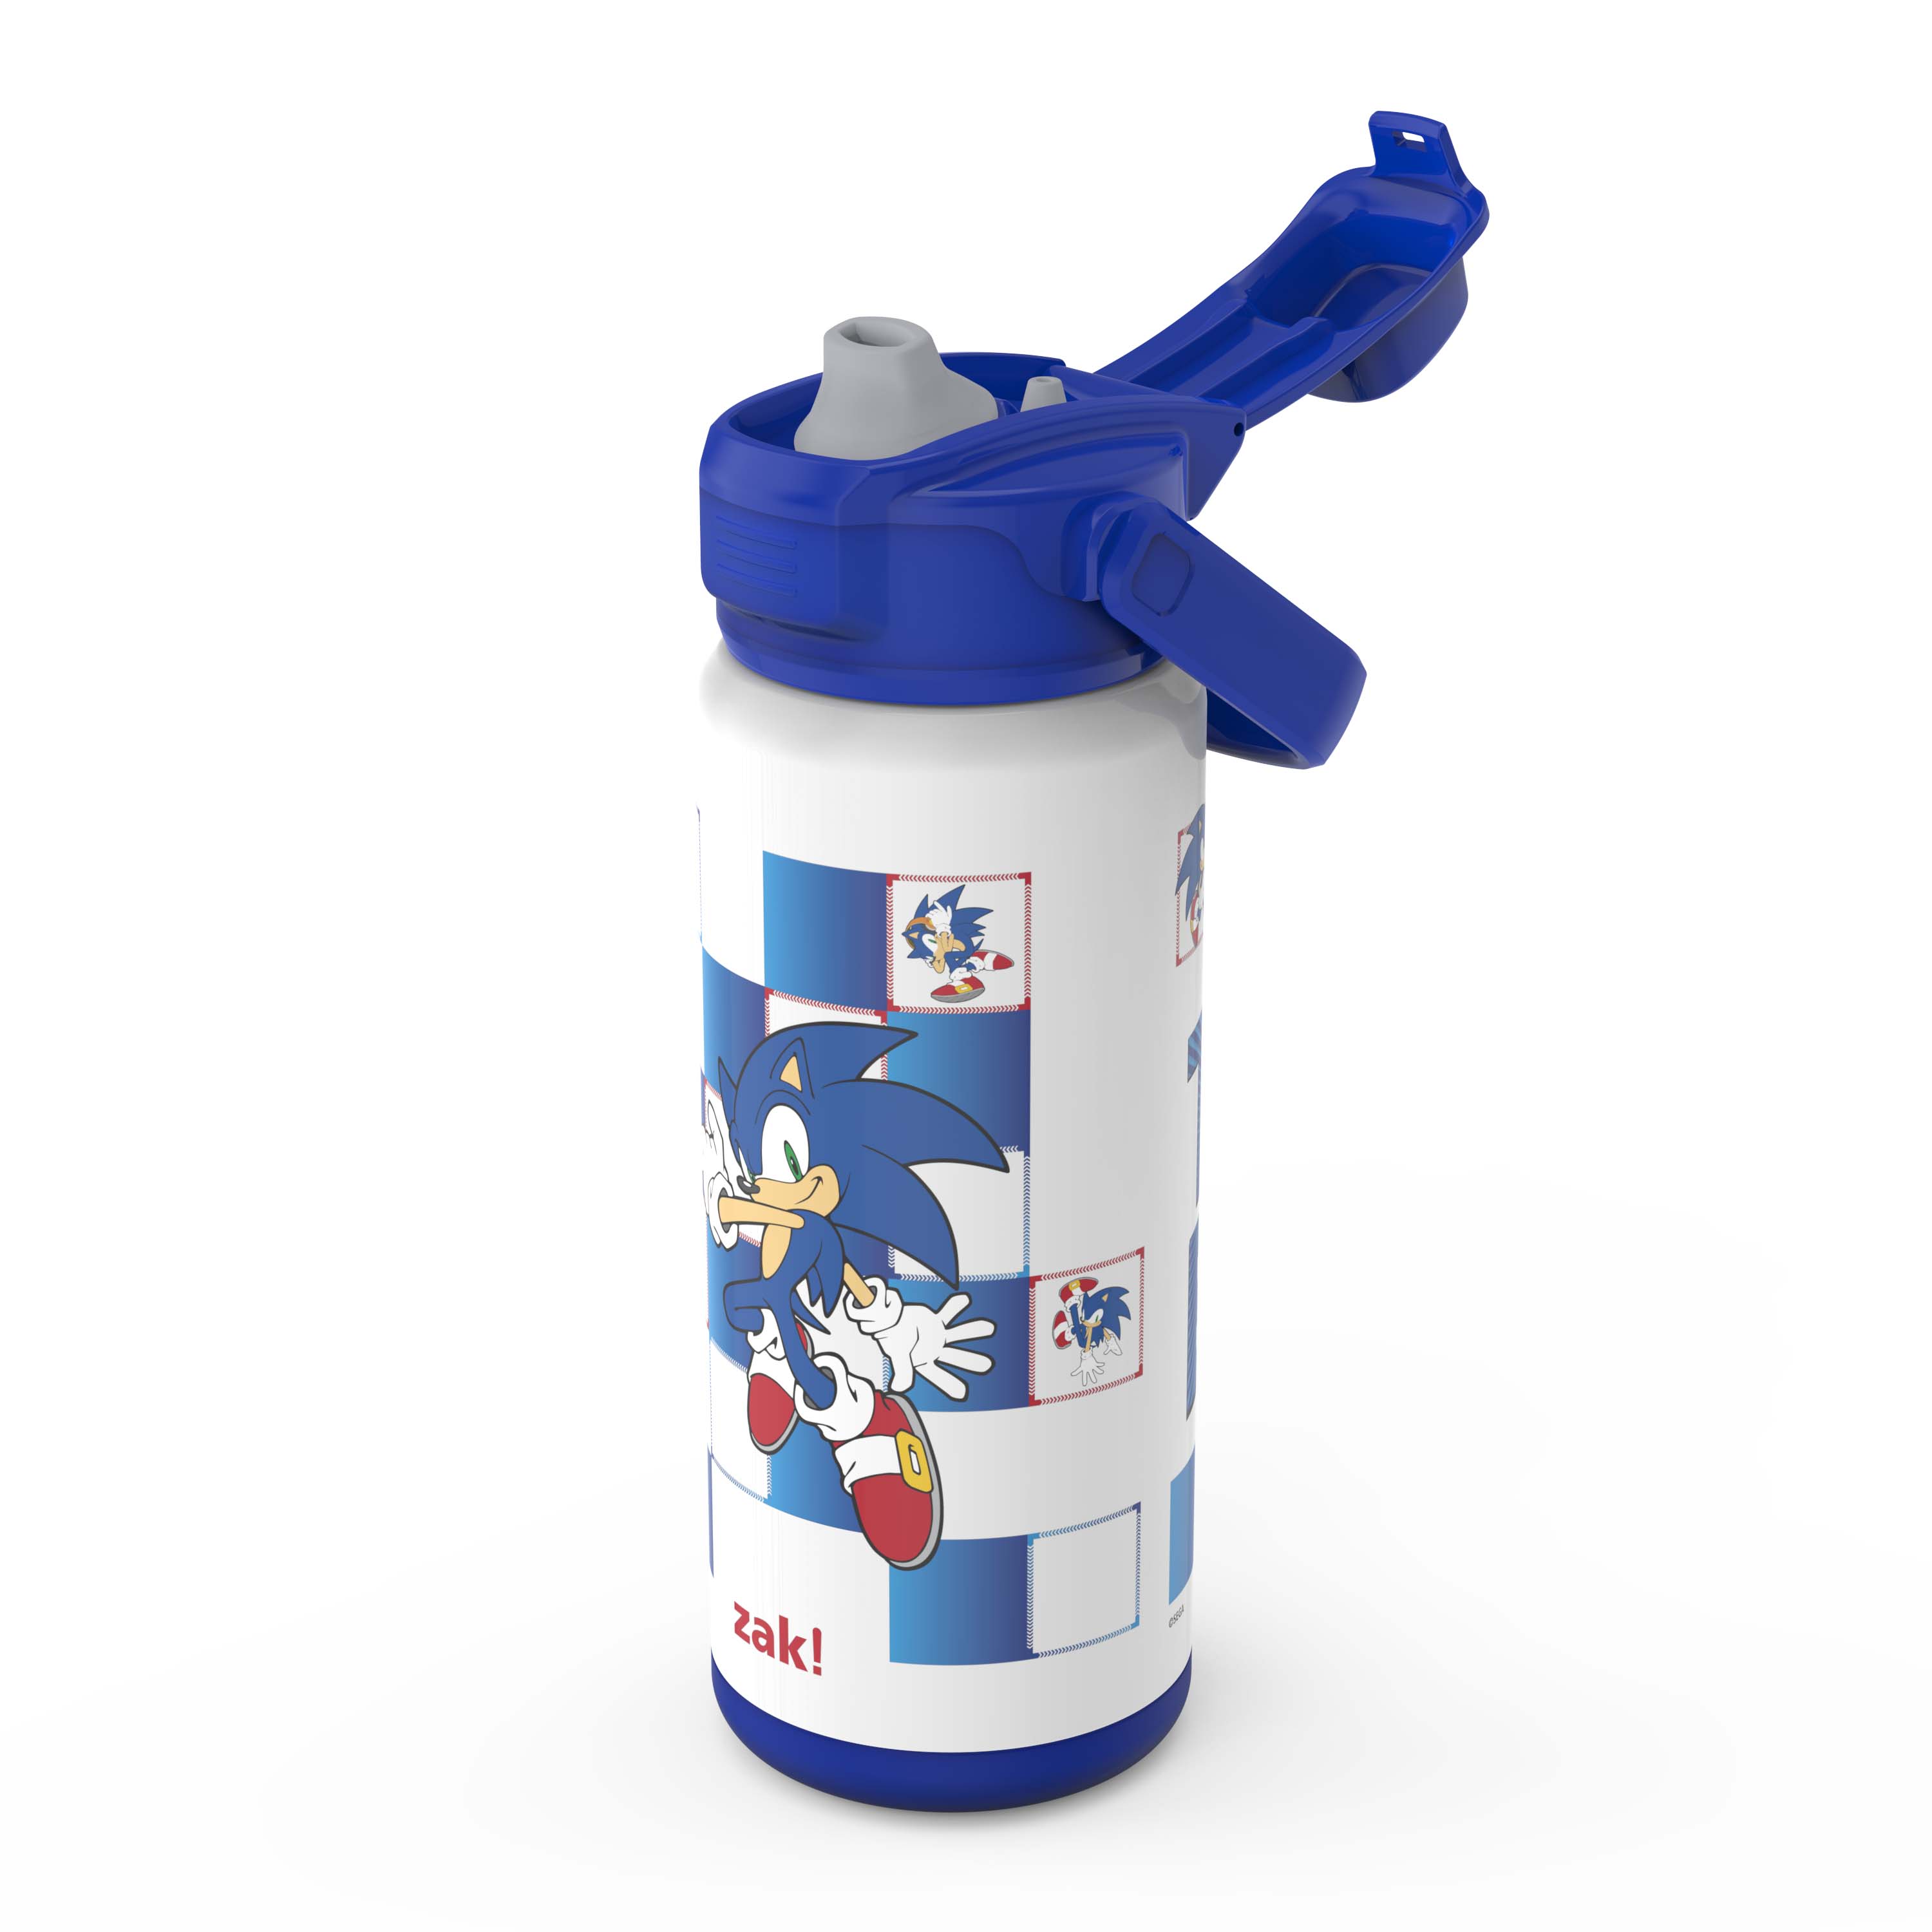 Zak Designs Sonic the Hedgehog Kids Water Bottle with Spout Cover